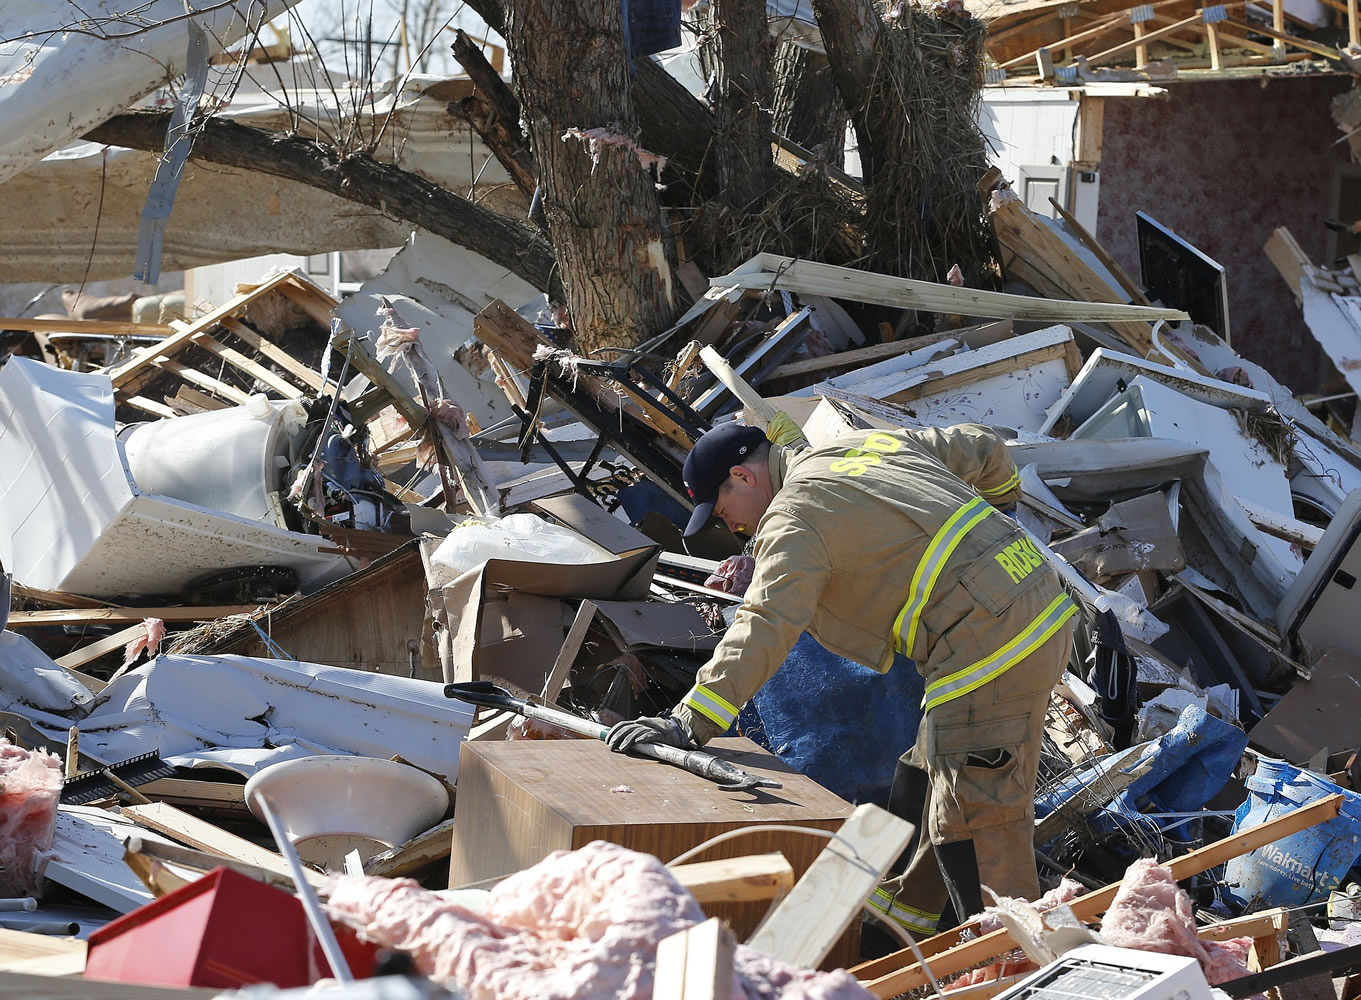 Dugan Ridenour of the Sand Springs fire department digs through rubble in the tornado-damaged River Oaks Estates mobile home park in Sand Springs, Okla., on Thursday.